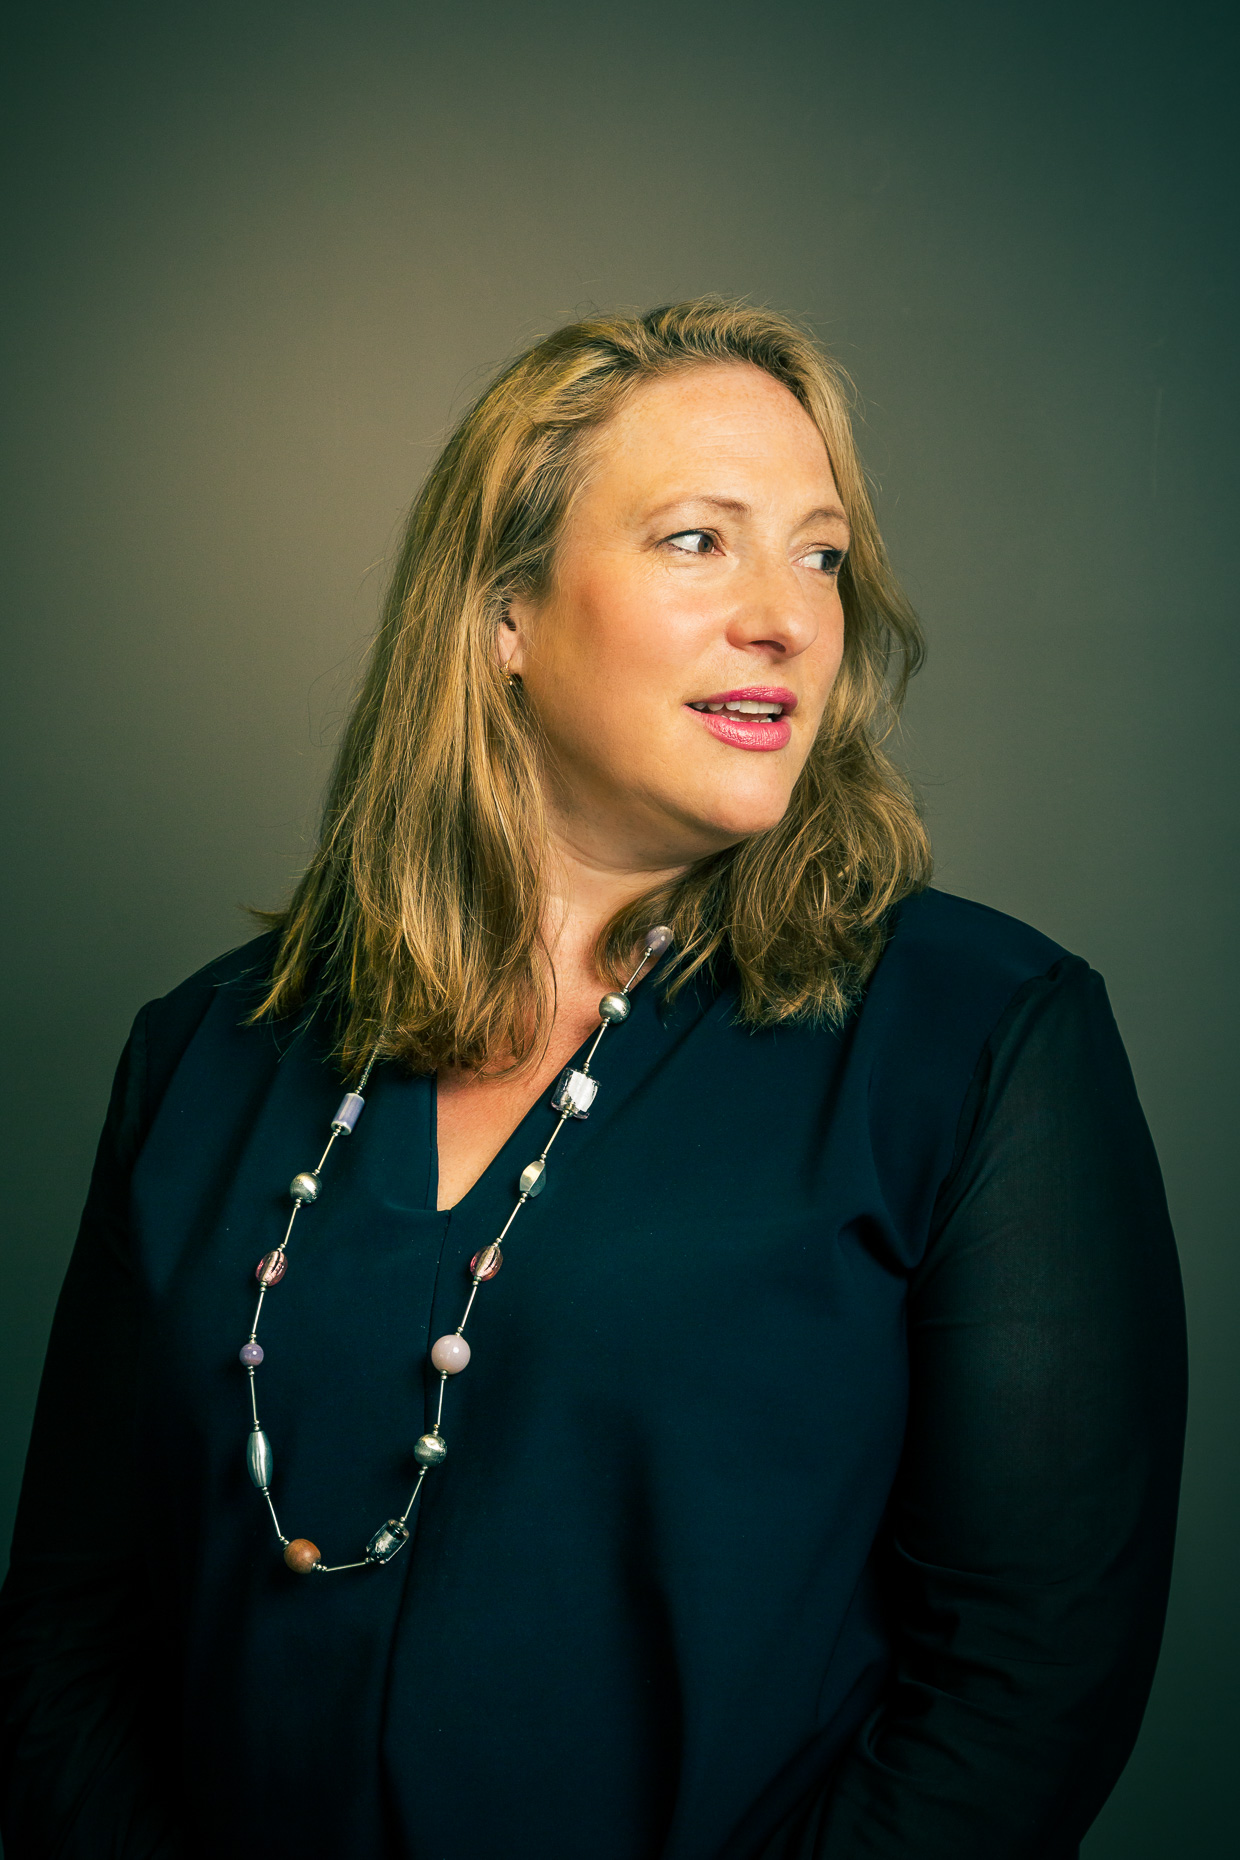 Polly - London Corporate Portraits